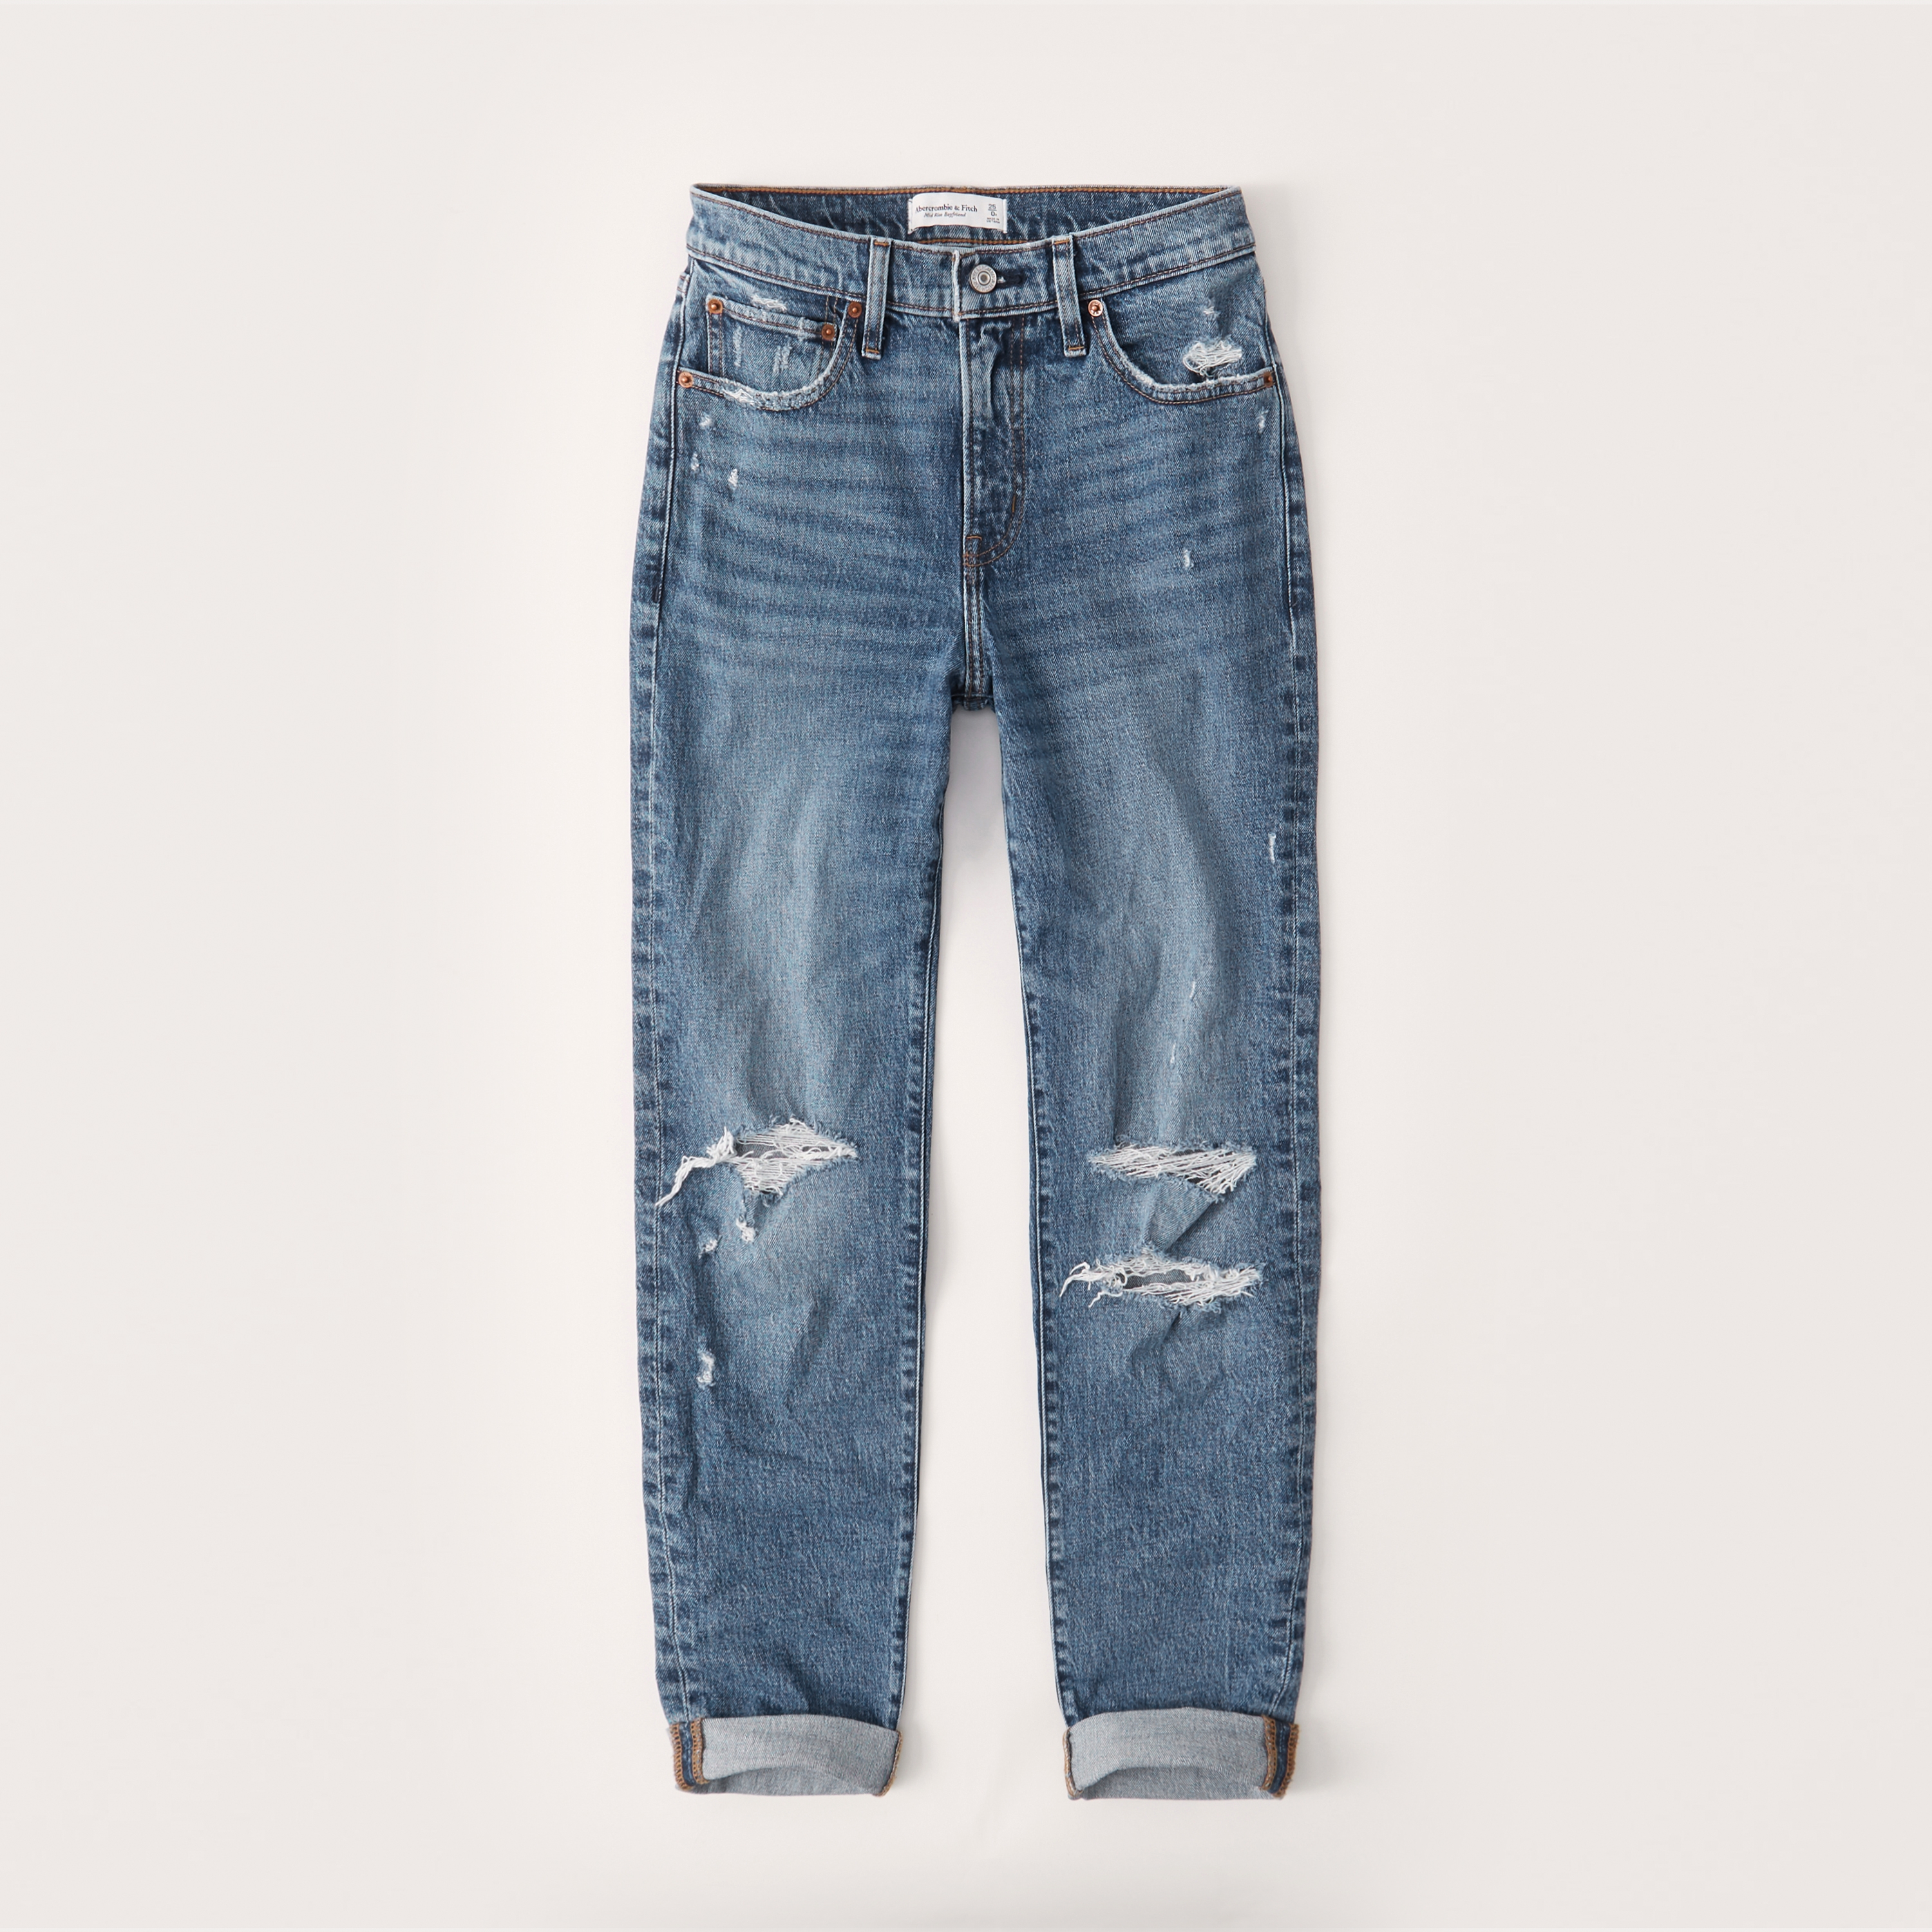 abercrombie and fitch womens jeans review